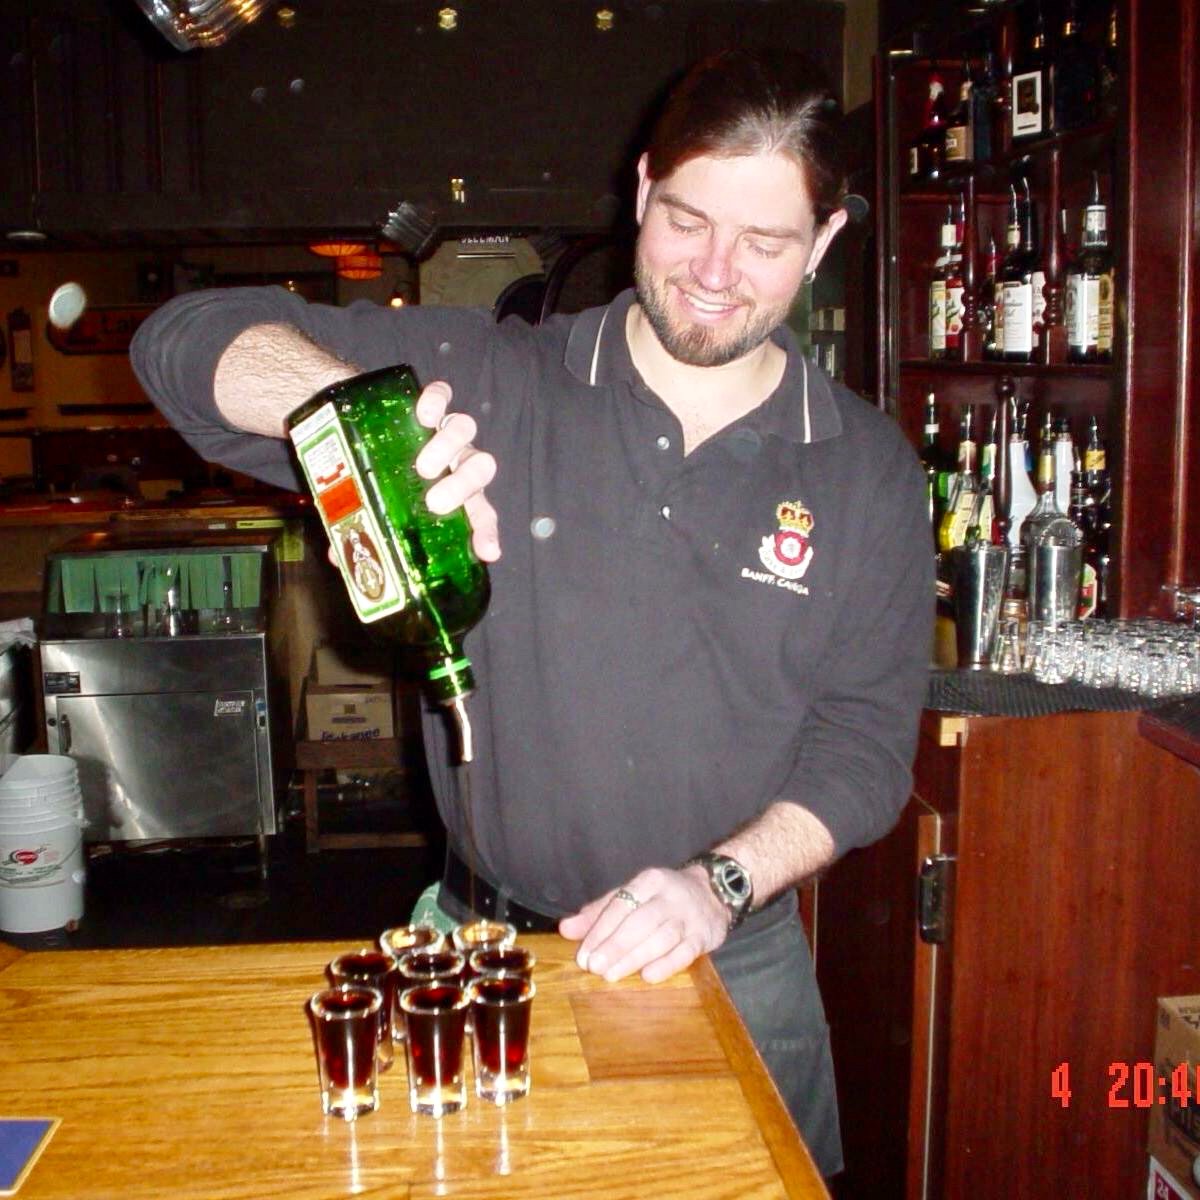 This #throwbackthursday we are throwing it way back to when this guy had long flowing locks and an earring. You won’t see him behind the bar that often but when do he is most likely pouring some shots!